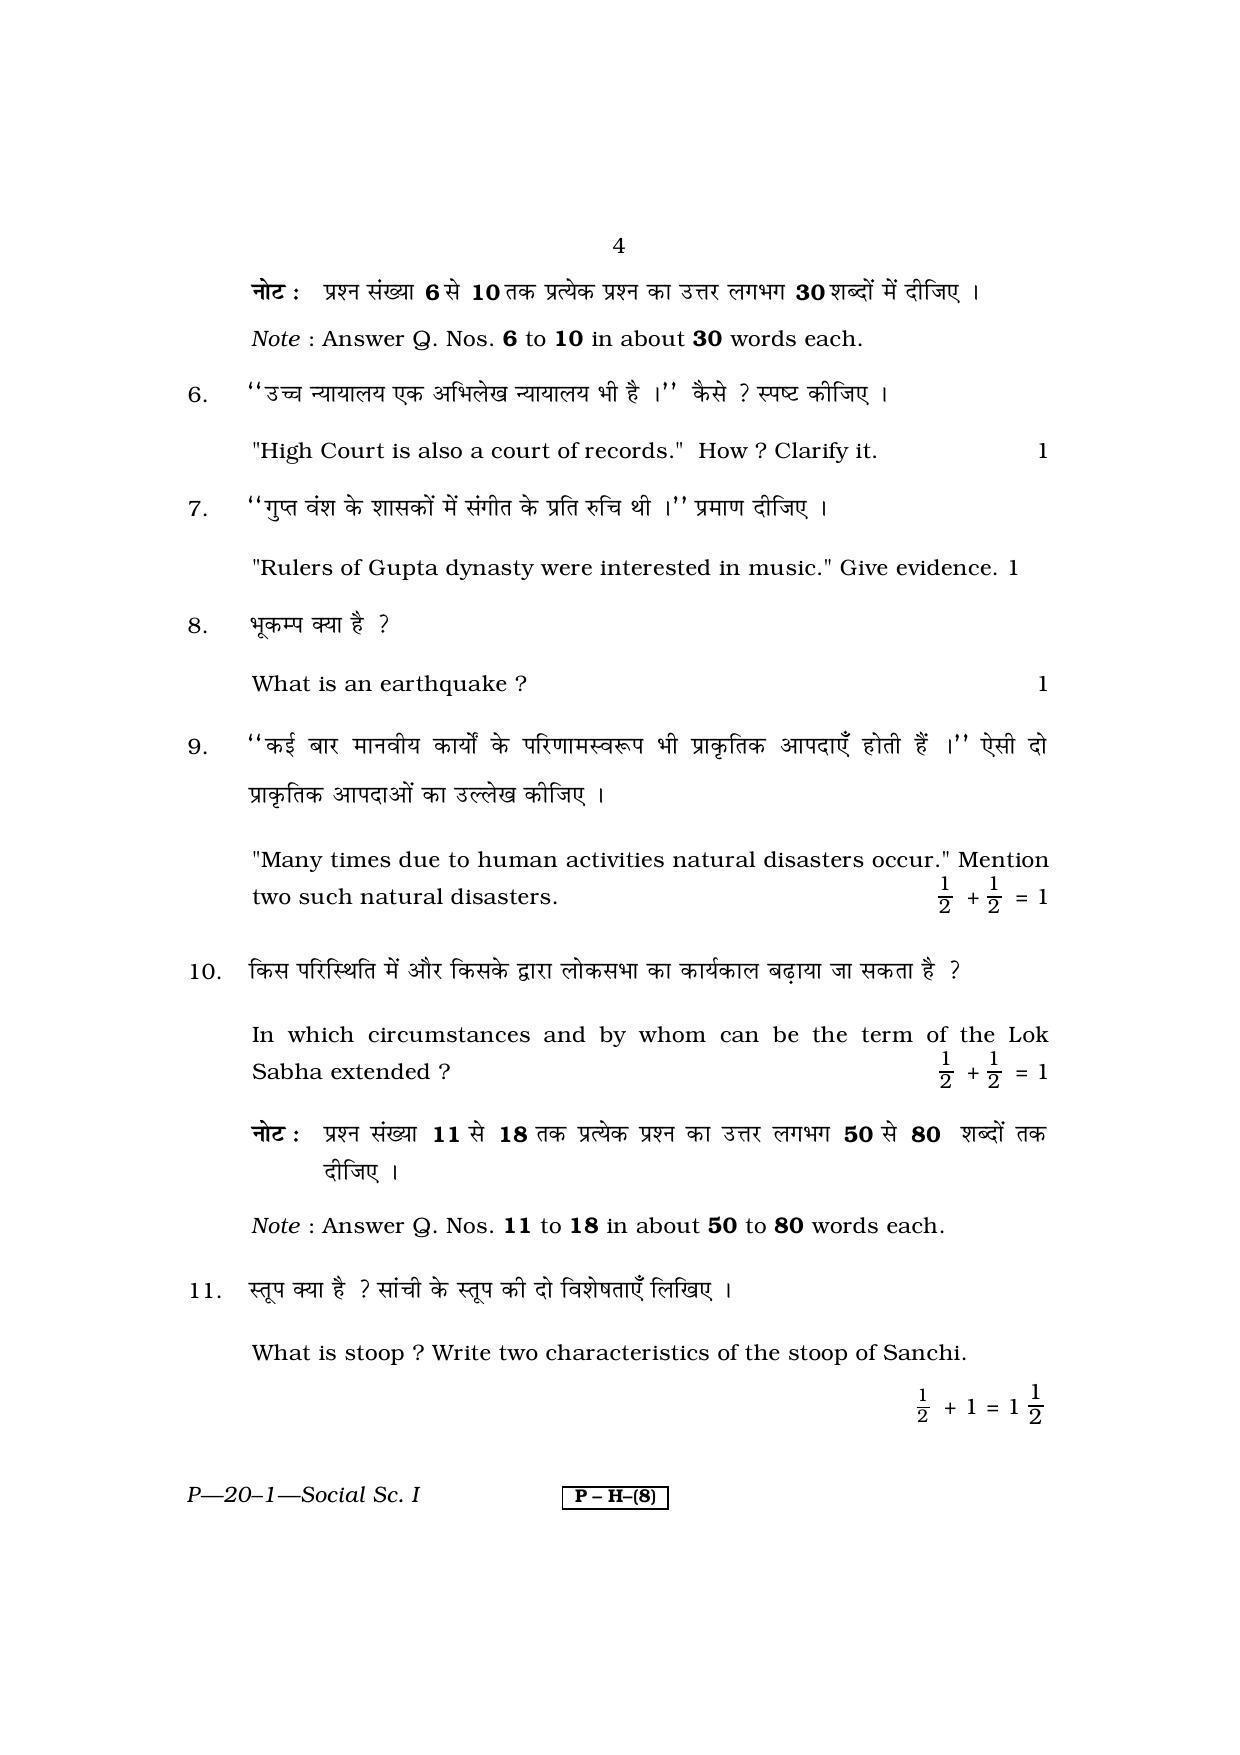 RBSE 2011 Social Science I Praveshika Question Paper - Page 4